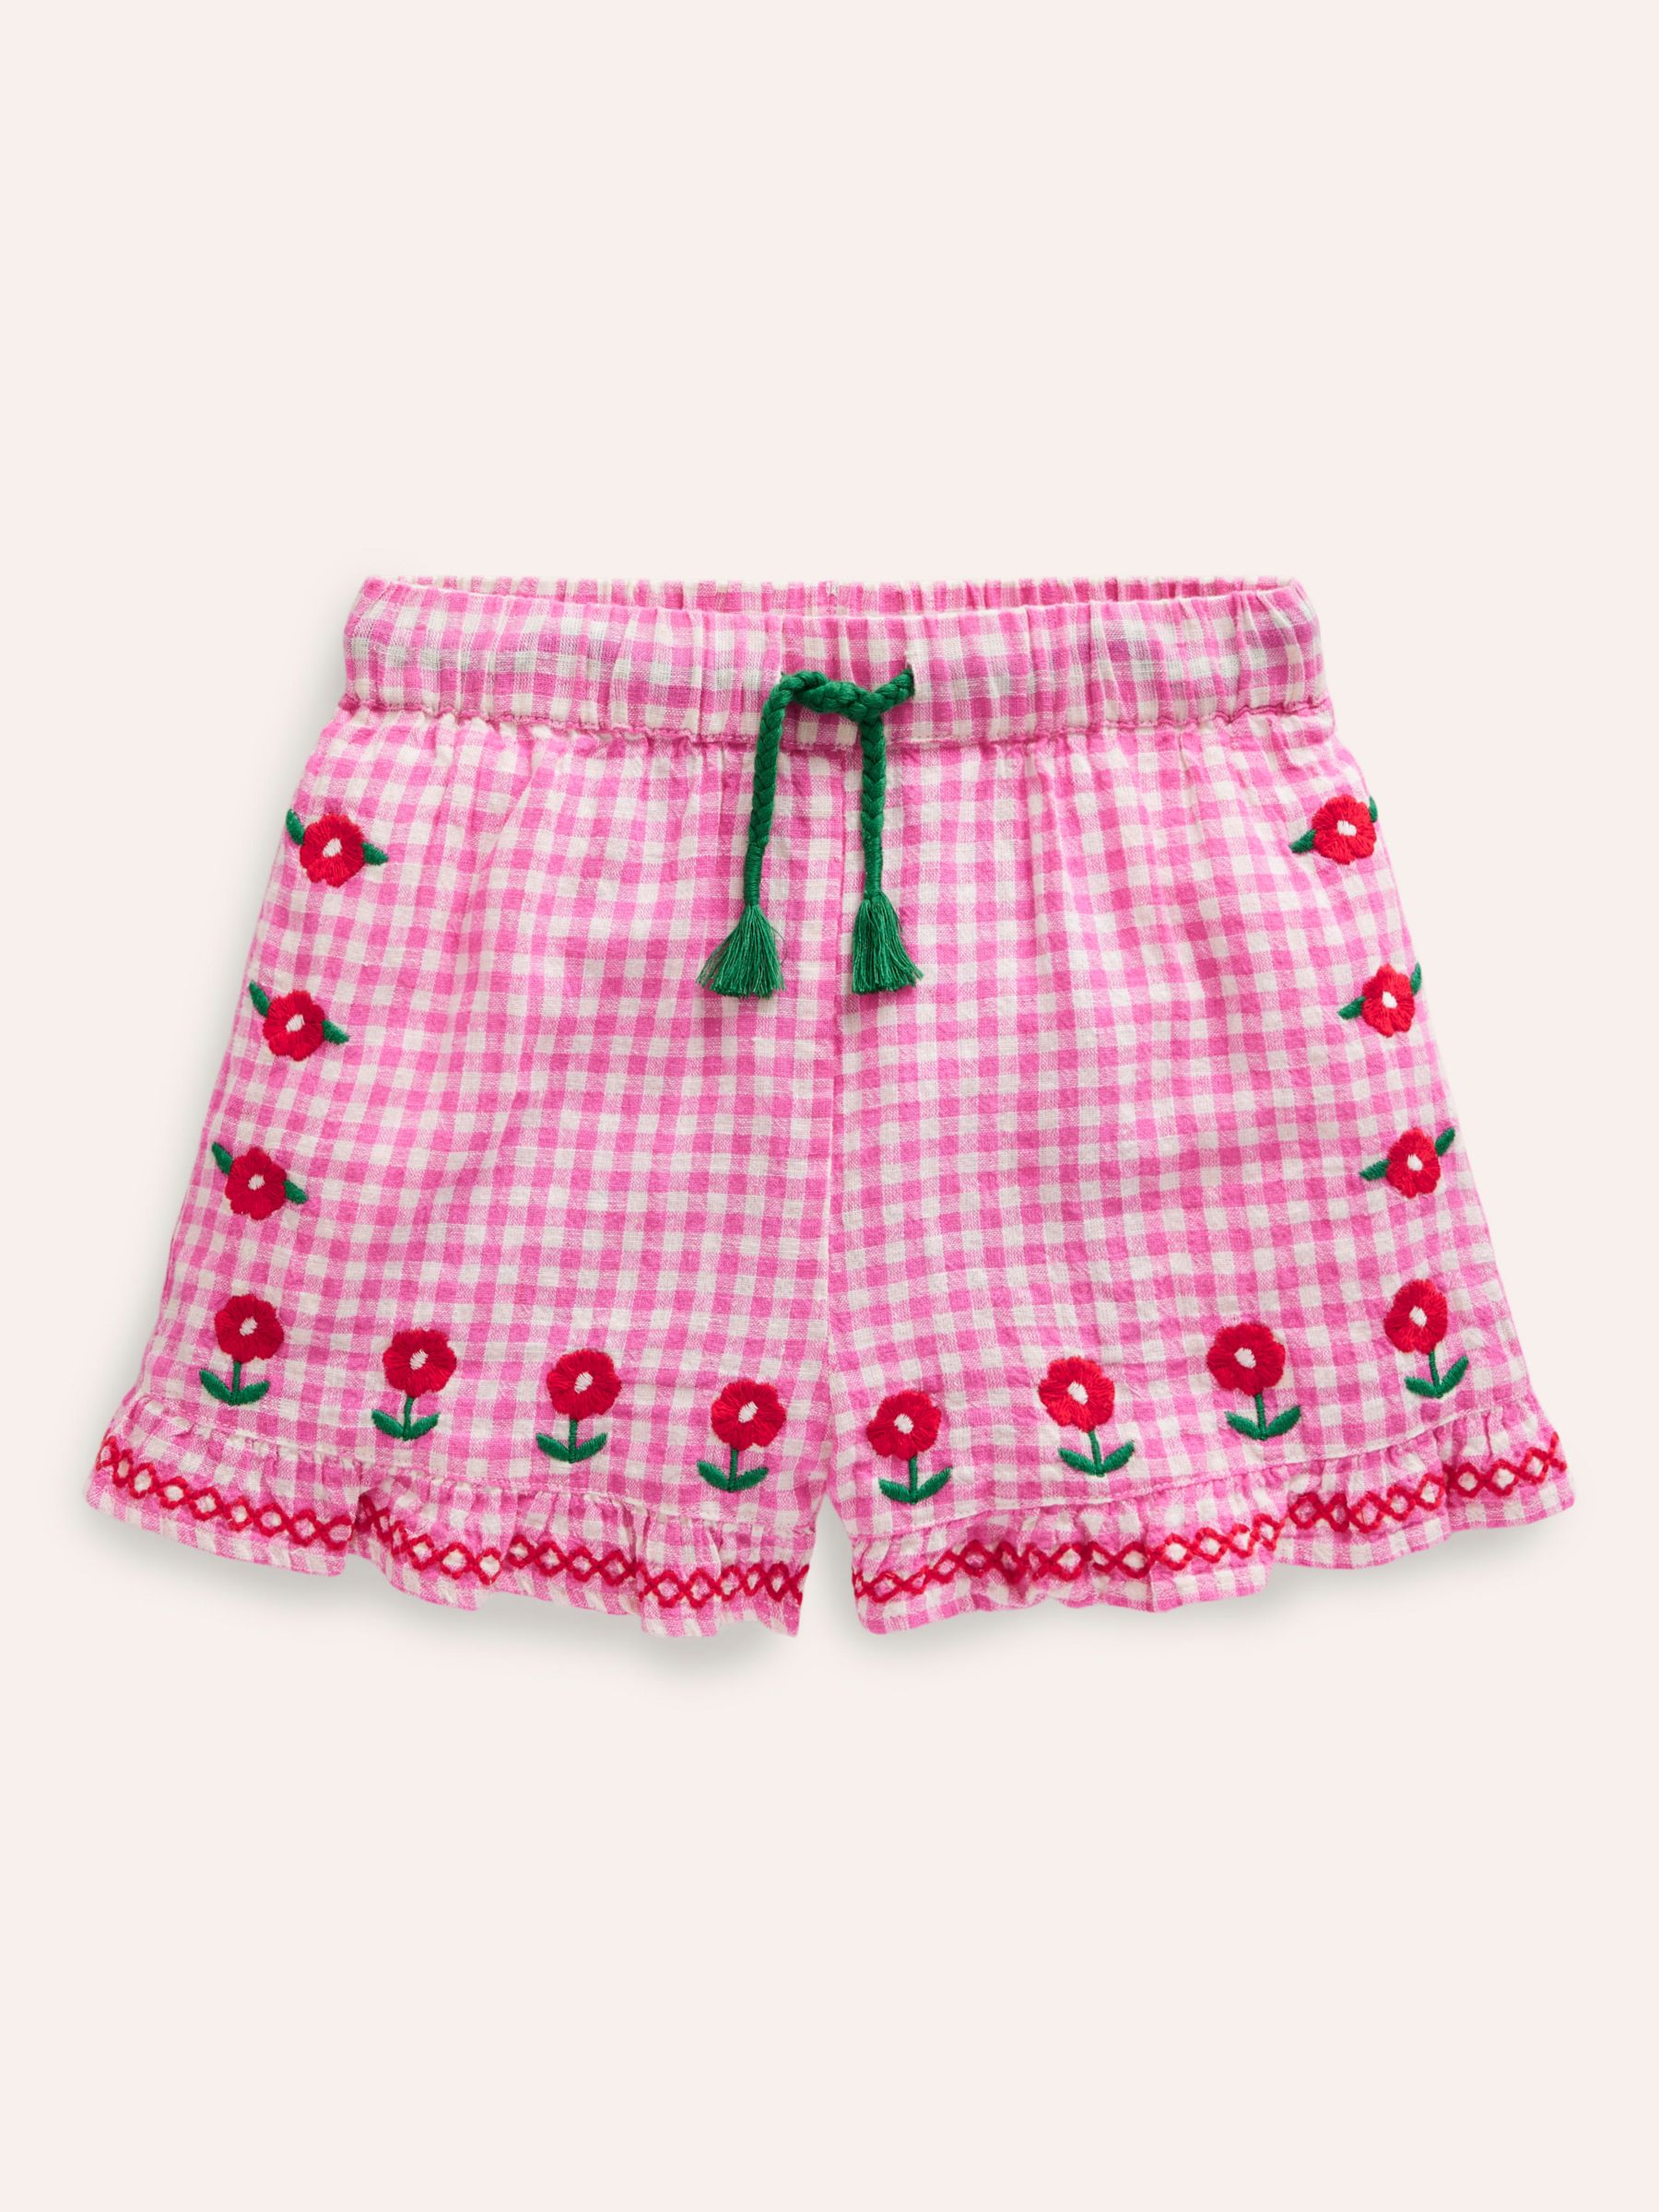 Mini Boden Kids' Floral Embroidered Frill Hem Woven Shorts, Pink/Ivory Gingham, 12-18 months